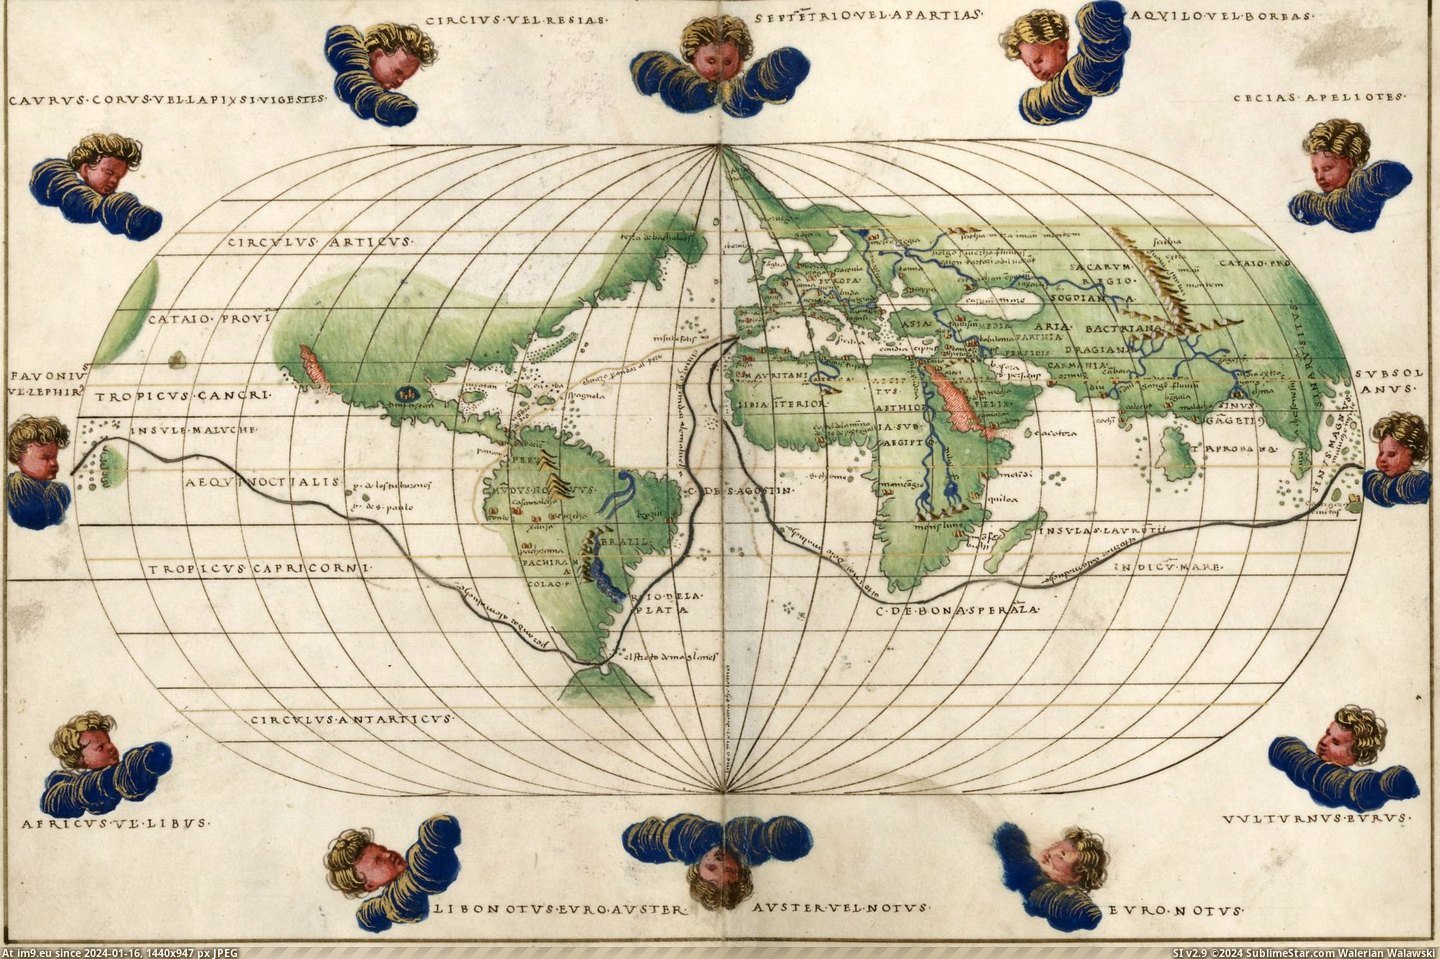 #Old #Earth #Atlas #Map [Mapporn] Magellan's Circumnavigation of the Earth, from the Portolan Atlas by Battista Agnese, c. 1544. [2235x1482] Pic. (Изображение из альбом My r/MAPS favs))